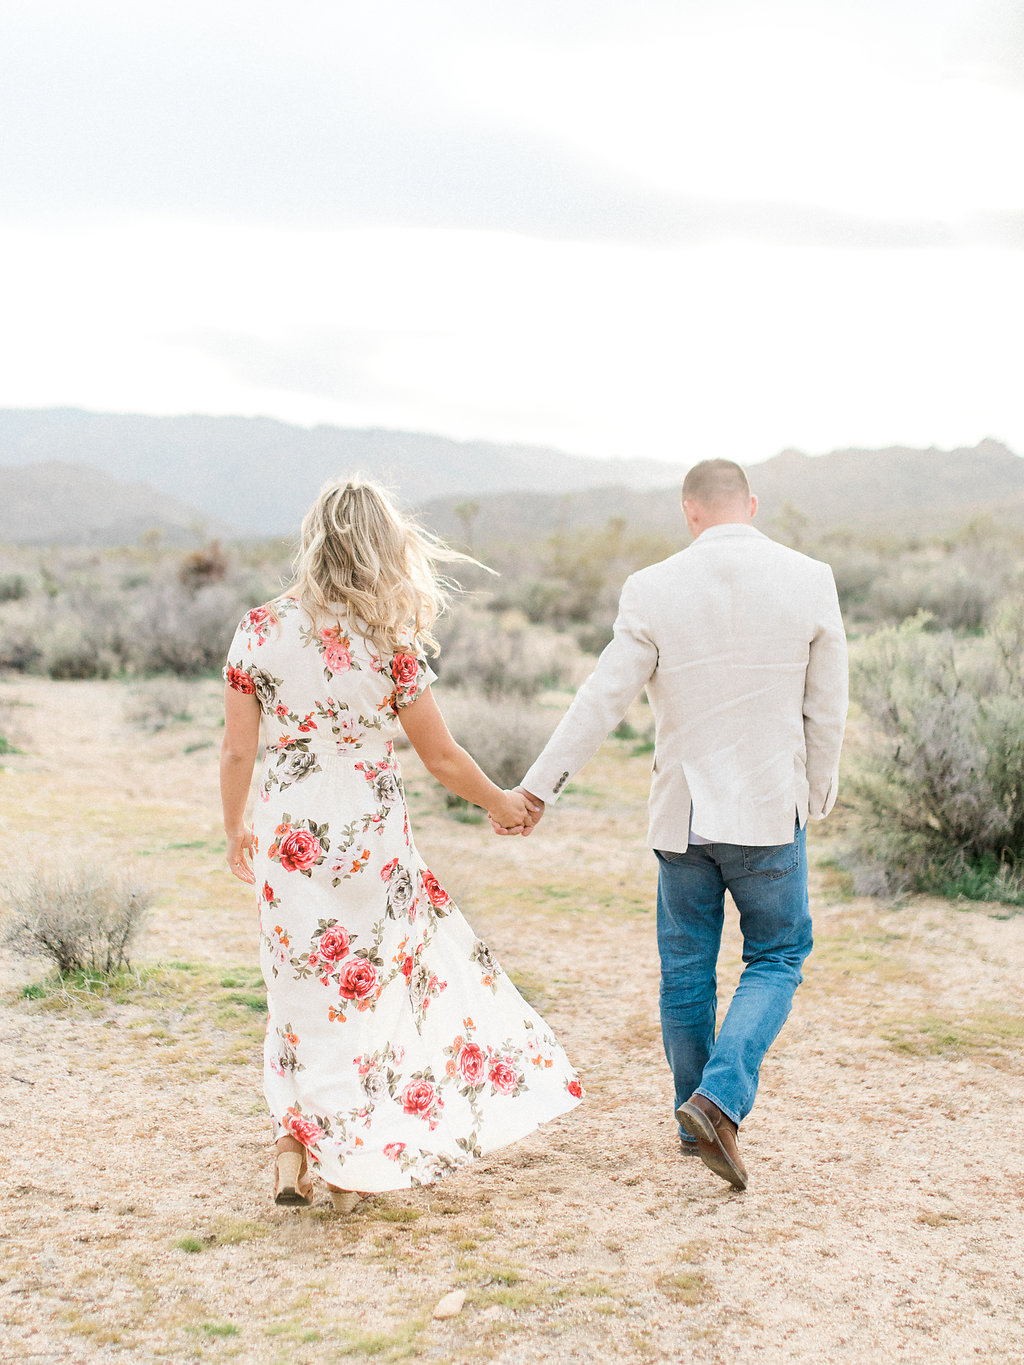 Joshua Tree Engagement Session | What to Wear for Pictures | Southern California Wedding Photographer | Mastin Labs Fuji Film | Fine Art Photographer | Desert Shoot | Hand in Hand Gorgeous Dress.jpg